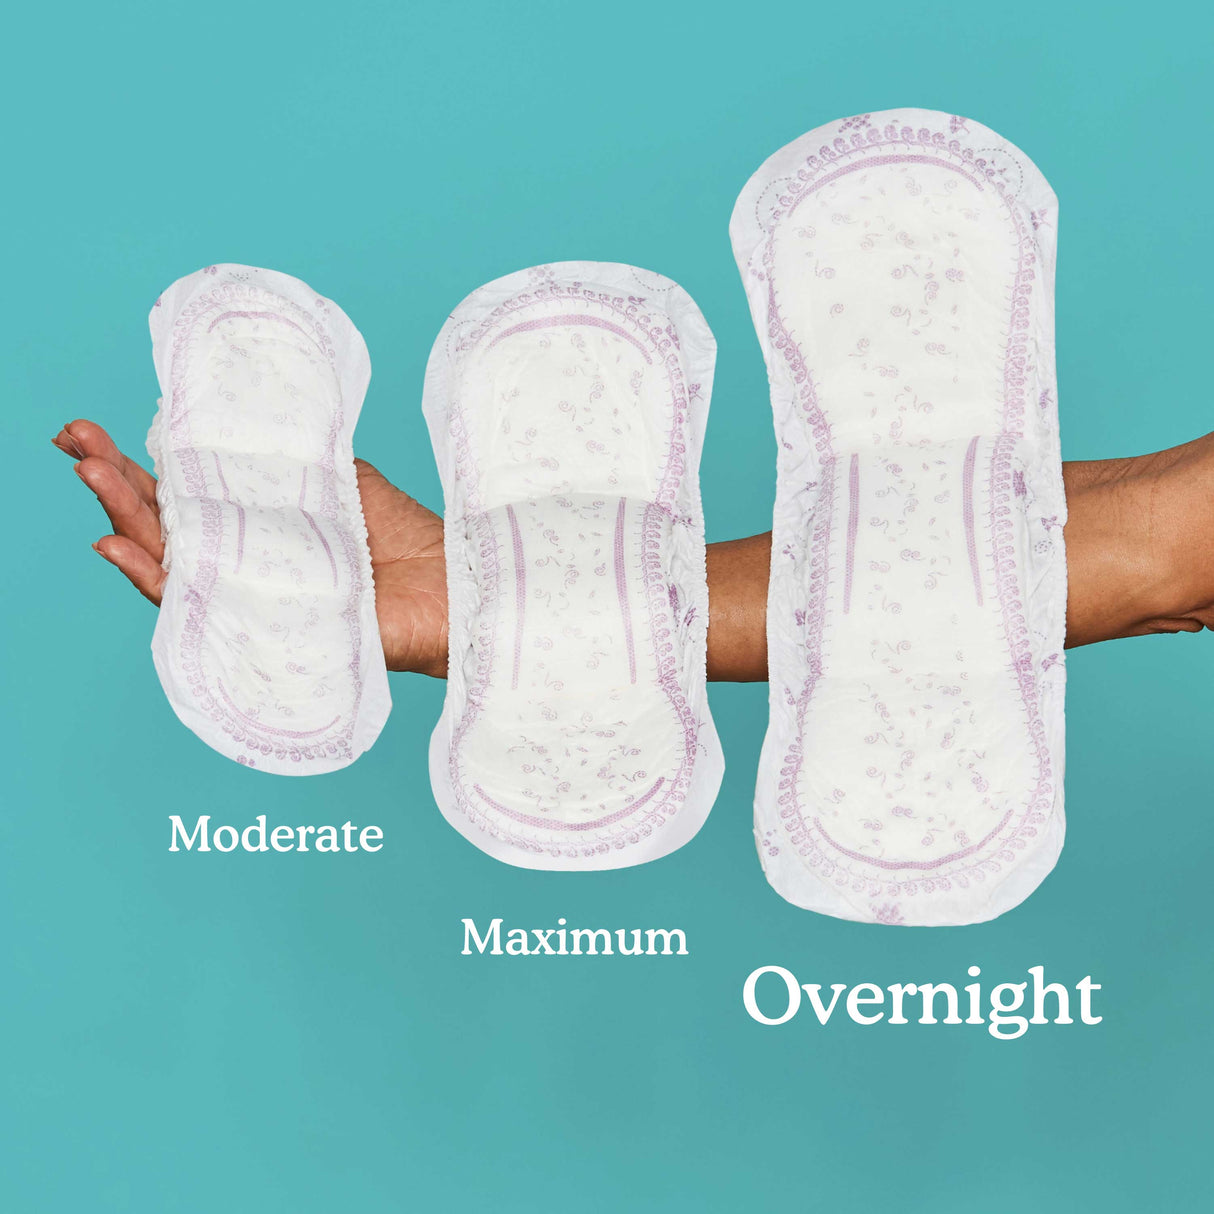 4 Differences Between Bladder Pads & Menstrual Pads